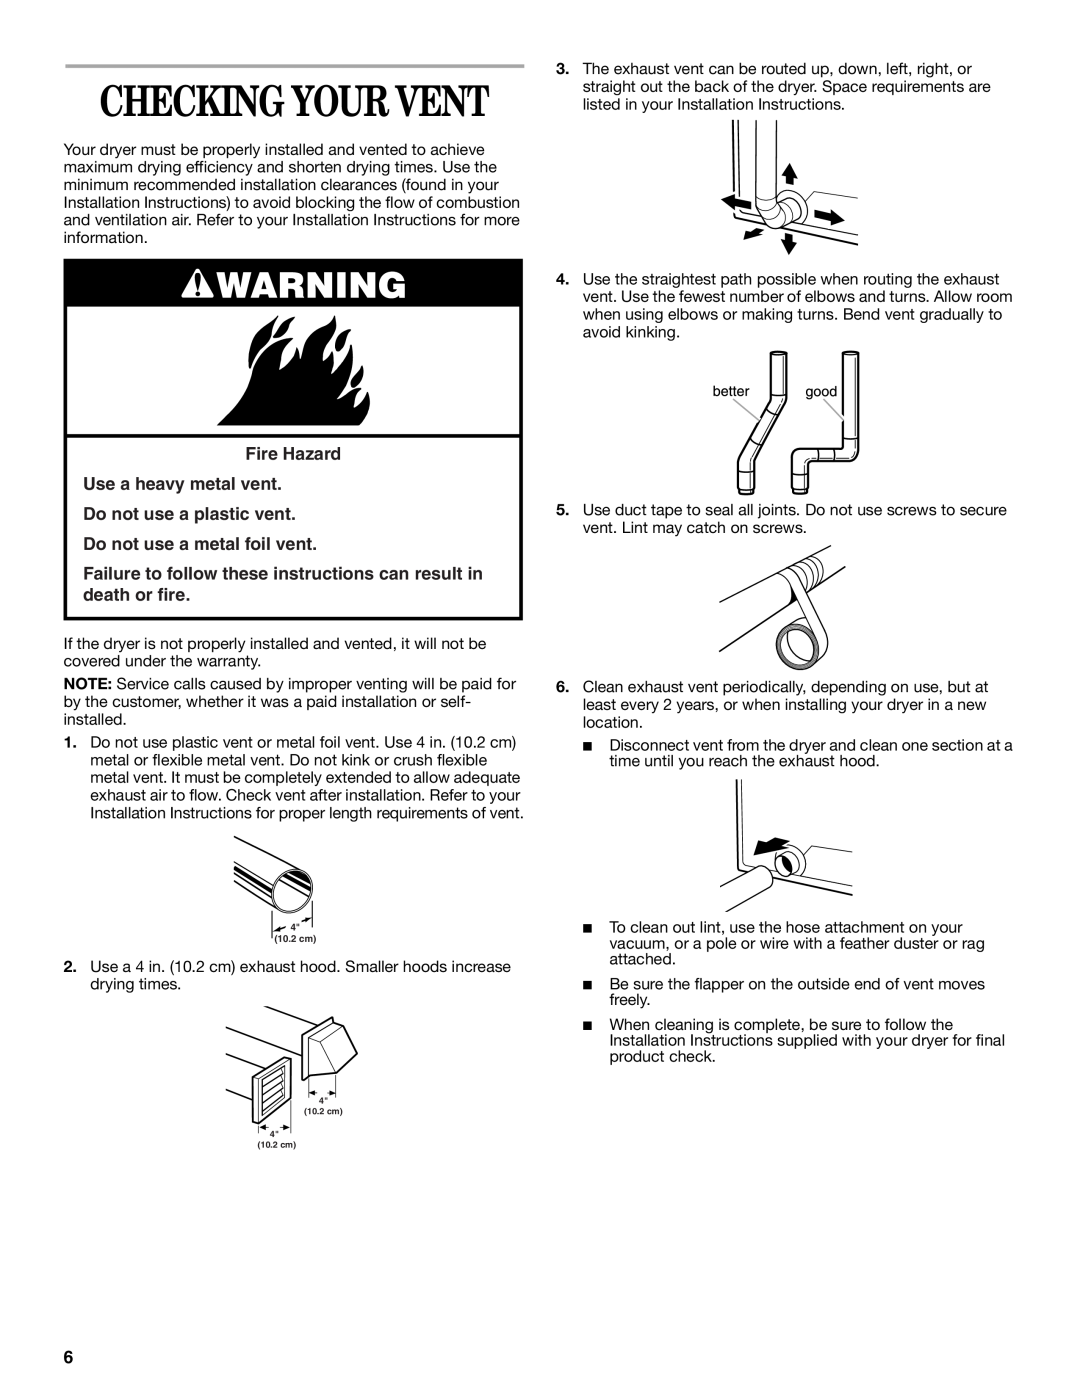 Whirlpool GCGM2991LQ0 manual Checking Your Vent, Fire Hazard Use a heavy metal vent Do not use a plastic vent 